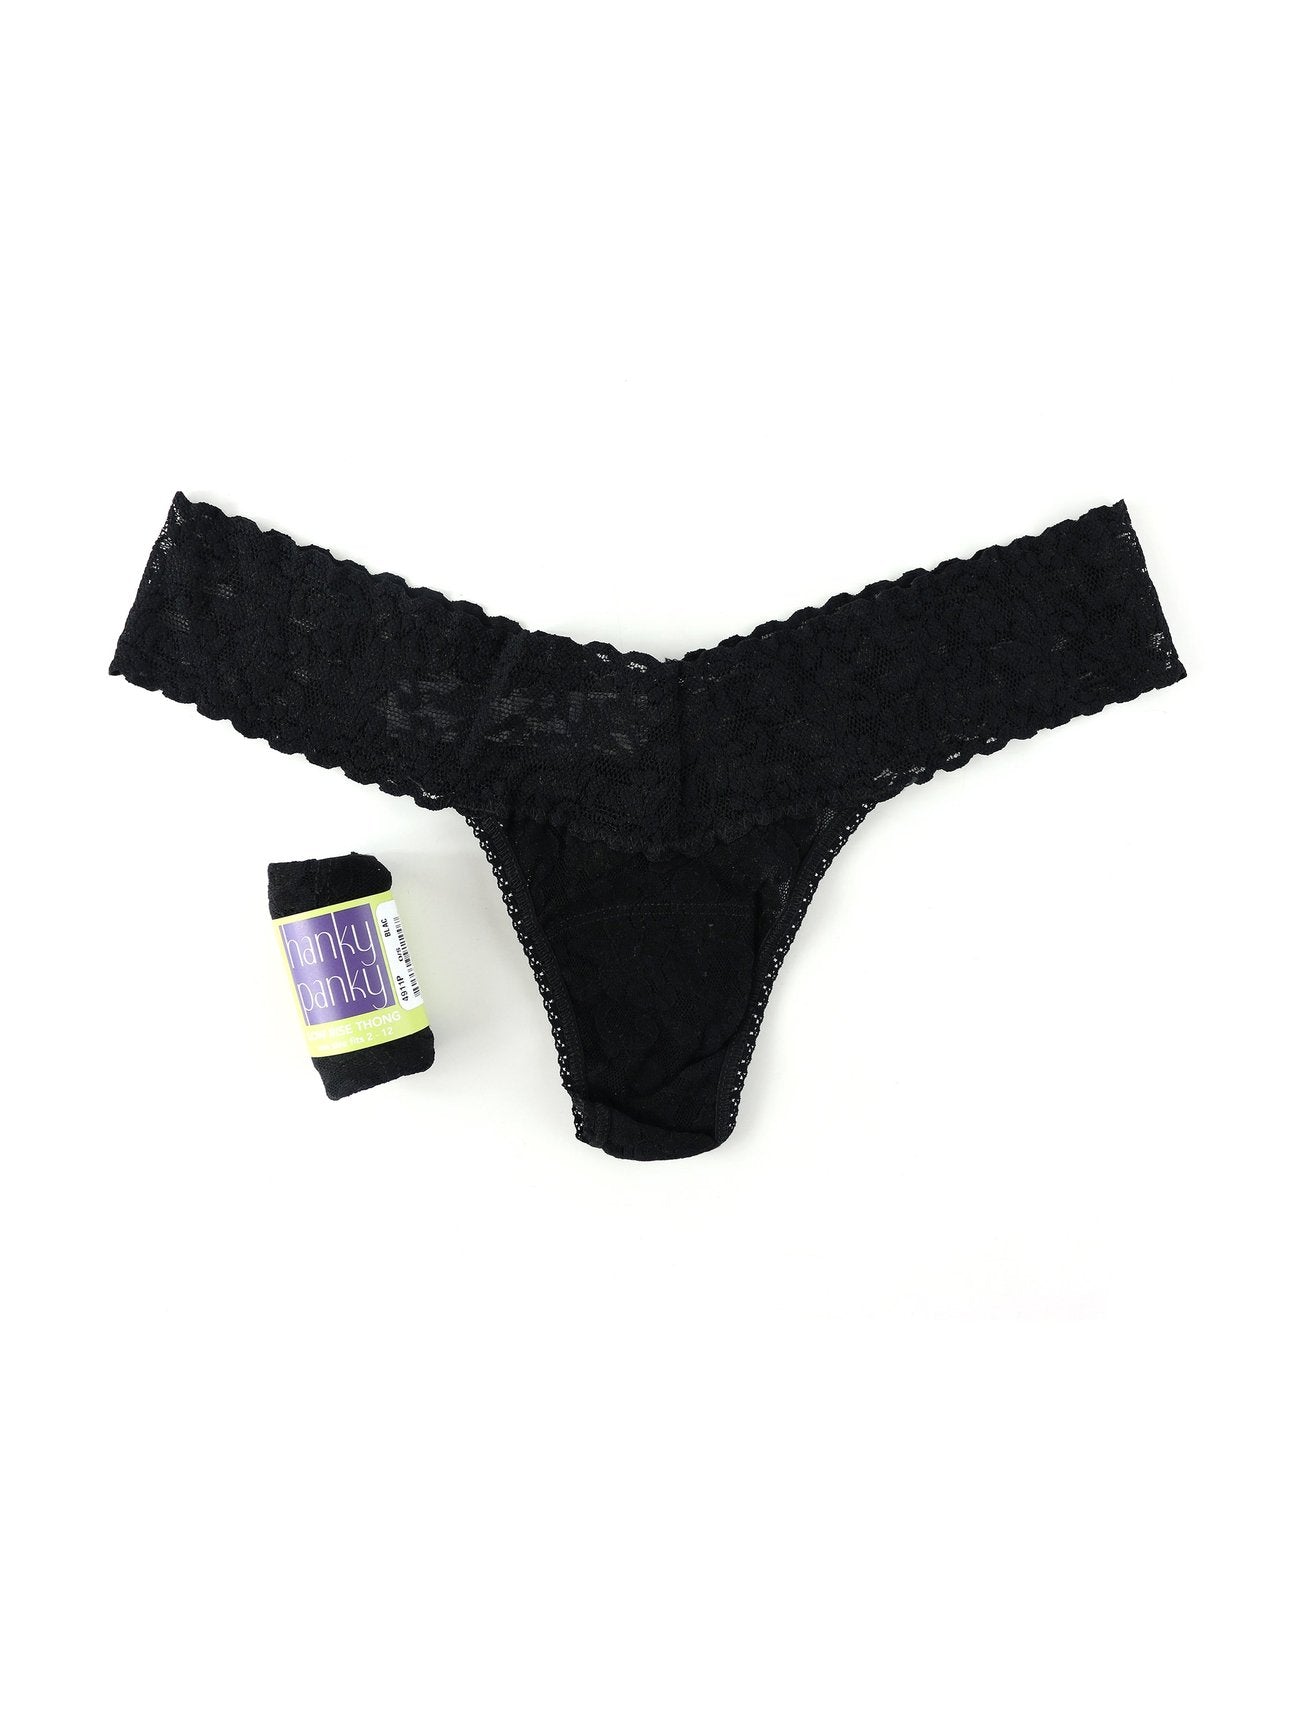 Hanky Panky Signature Low Rise Lace Thong